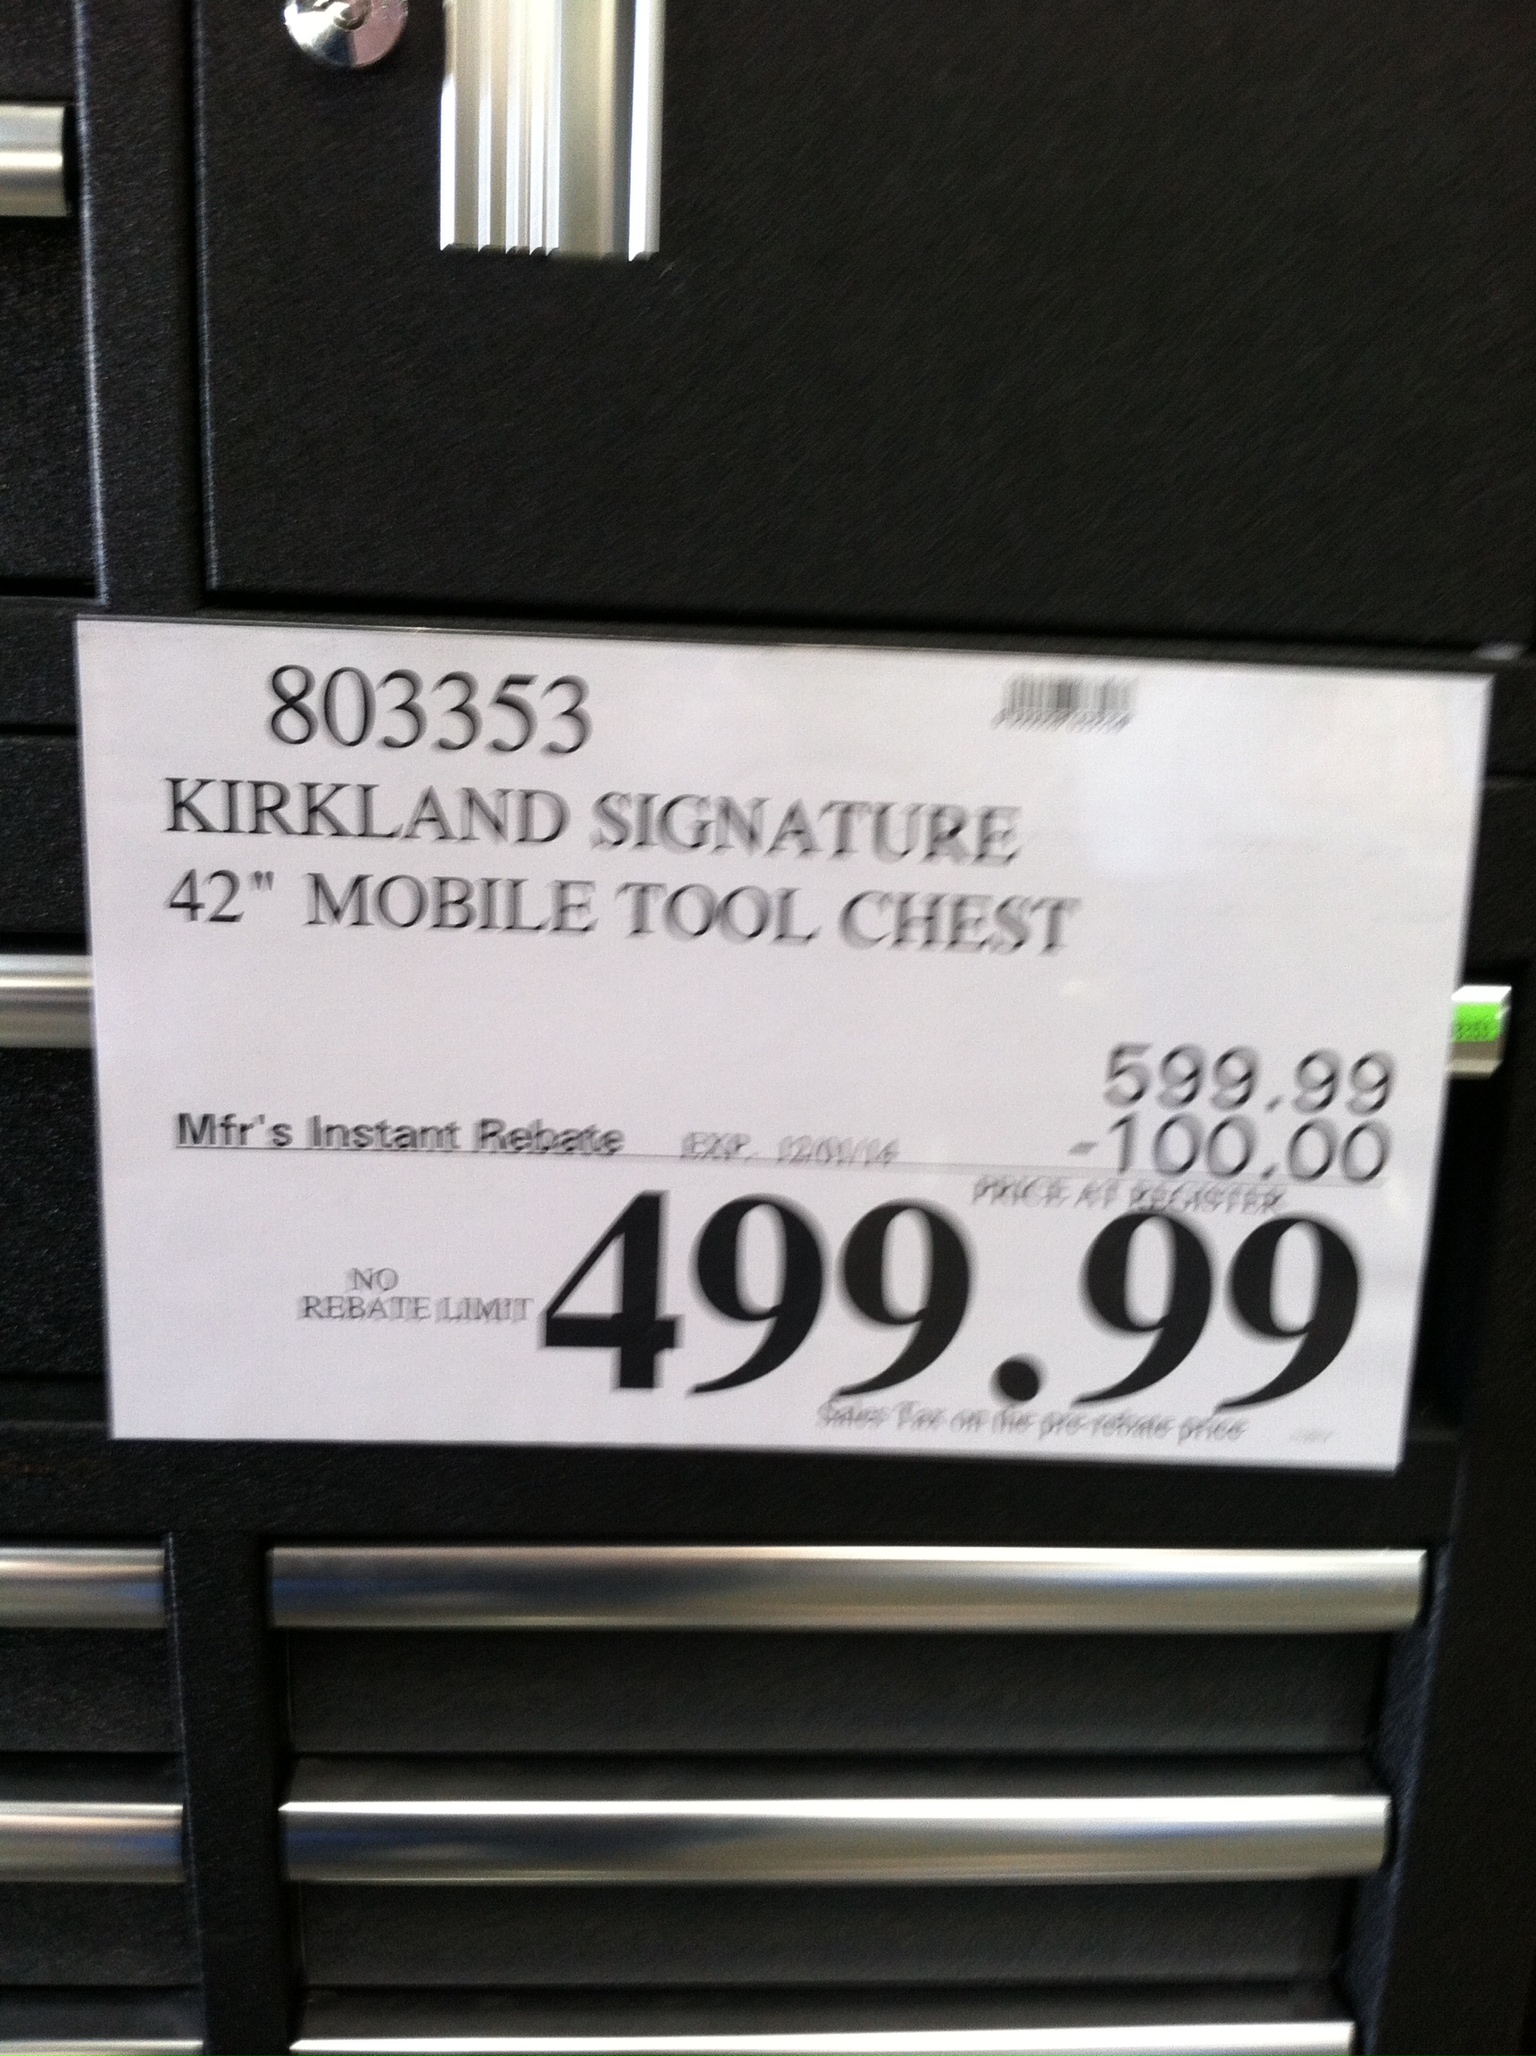 Kirkland 42" Heavy Duty 16 Drawer Mobile Tool Chest - 2500 lb Total Weight Capacity $499.99 ( Reg. Price $599.99 ) In Store Pick Up @ Costco